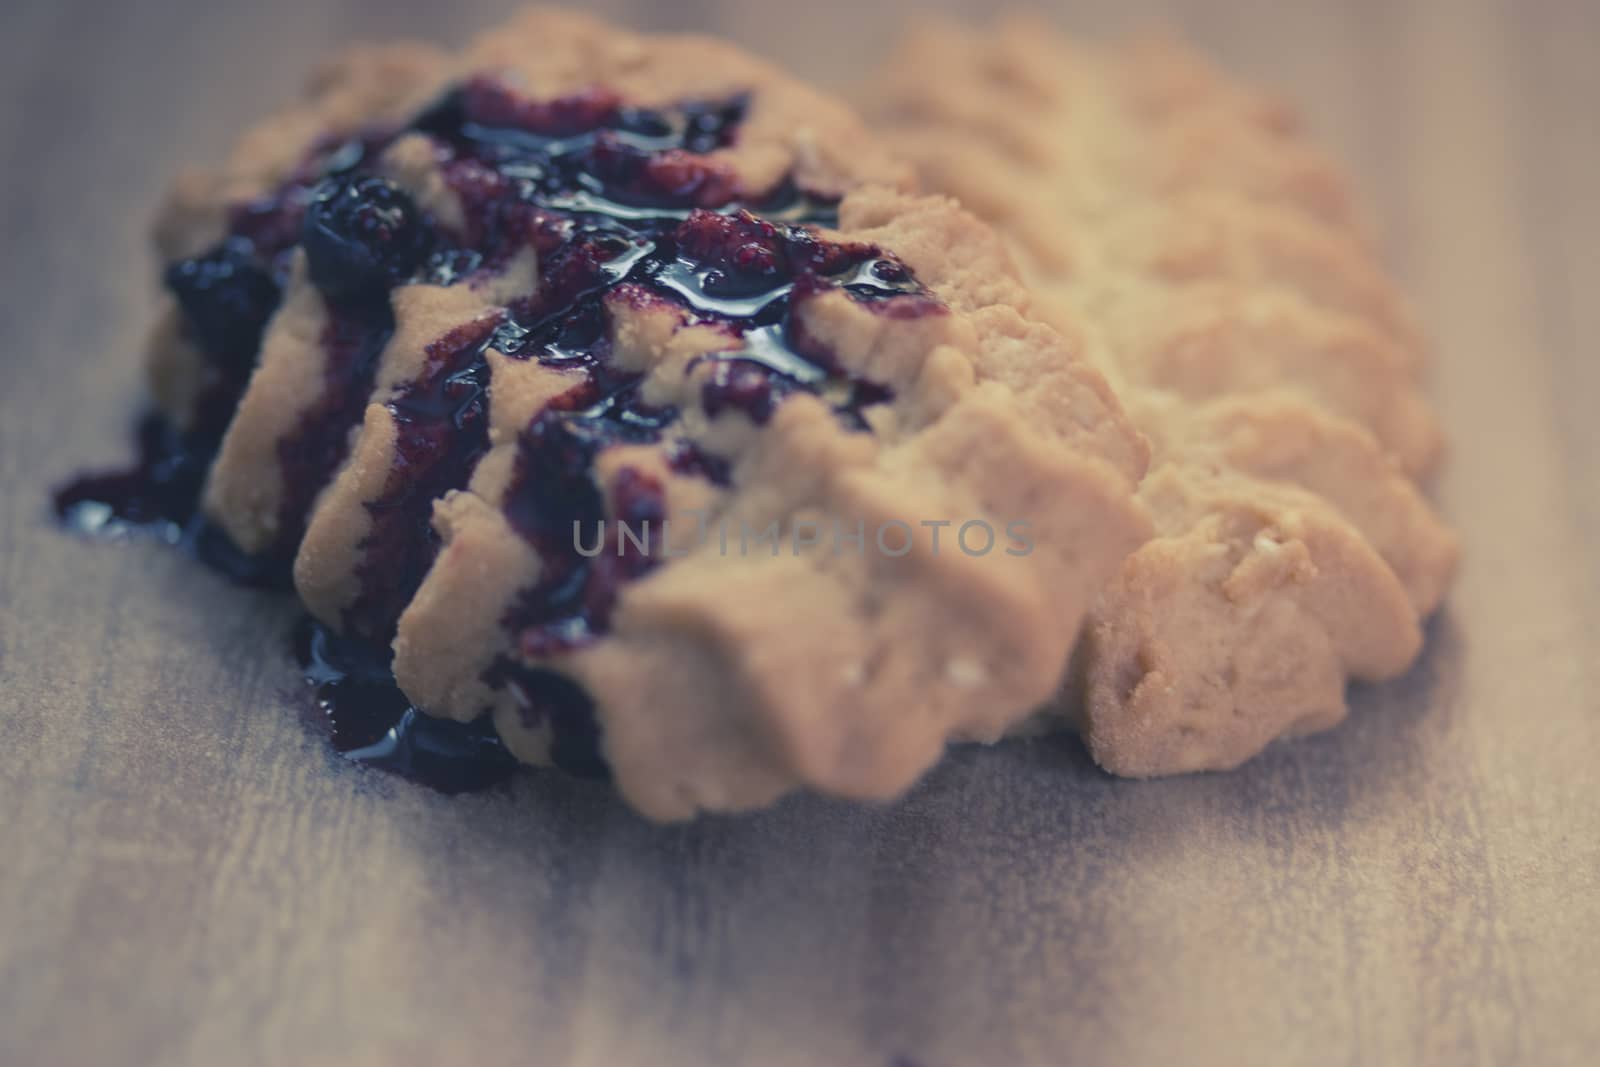 cookies with blueberry jam on wooden table